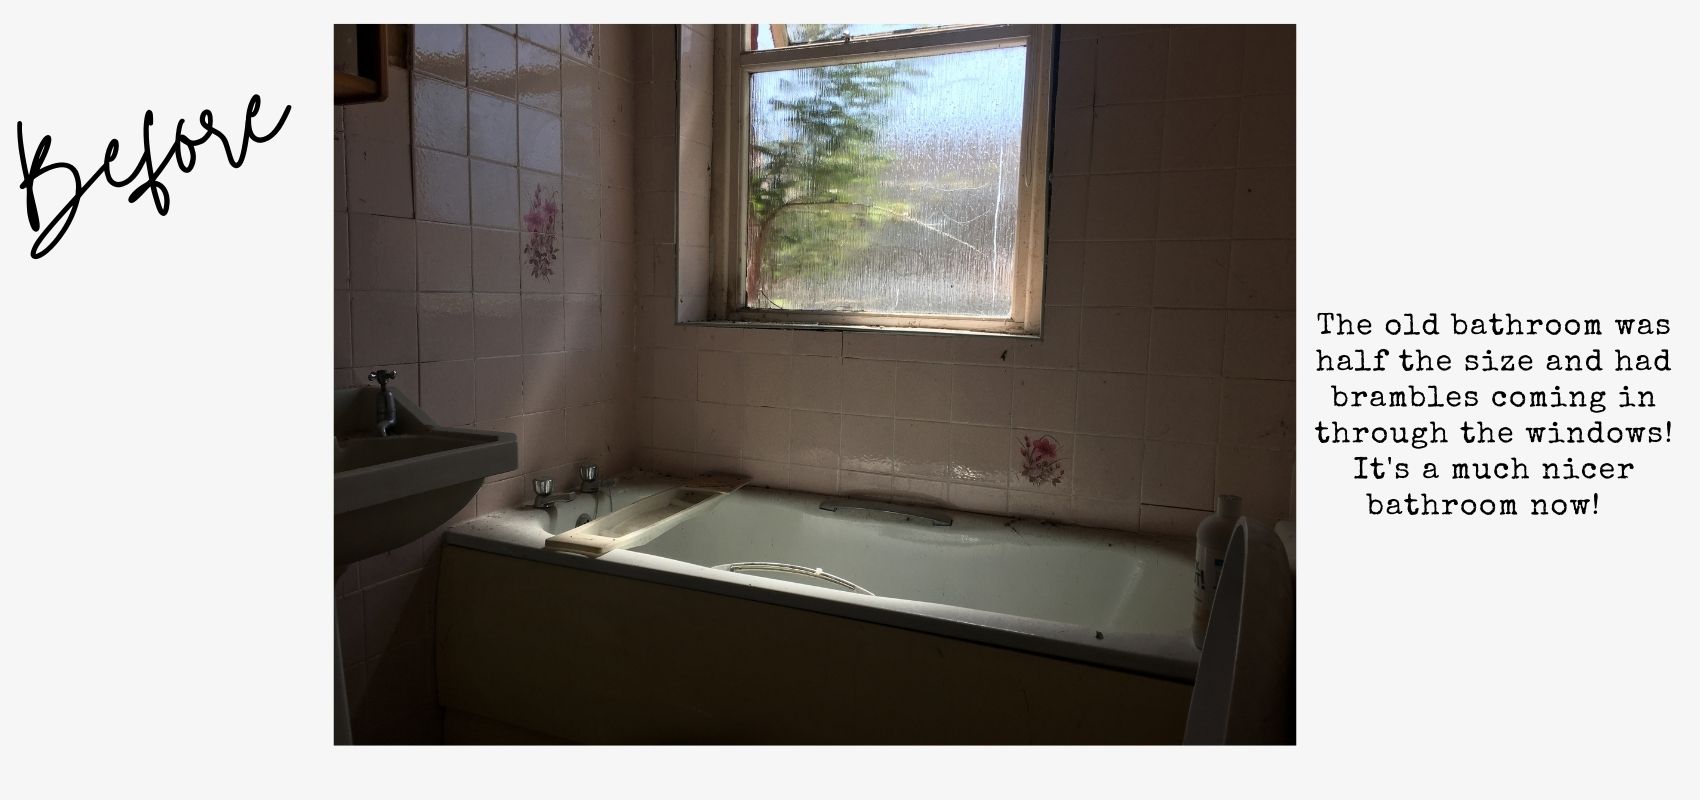 The old bathroom was half the size and had brambles coming through the windows!